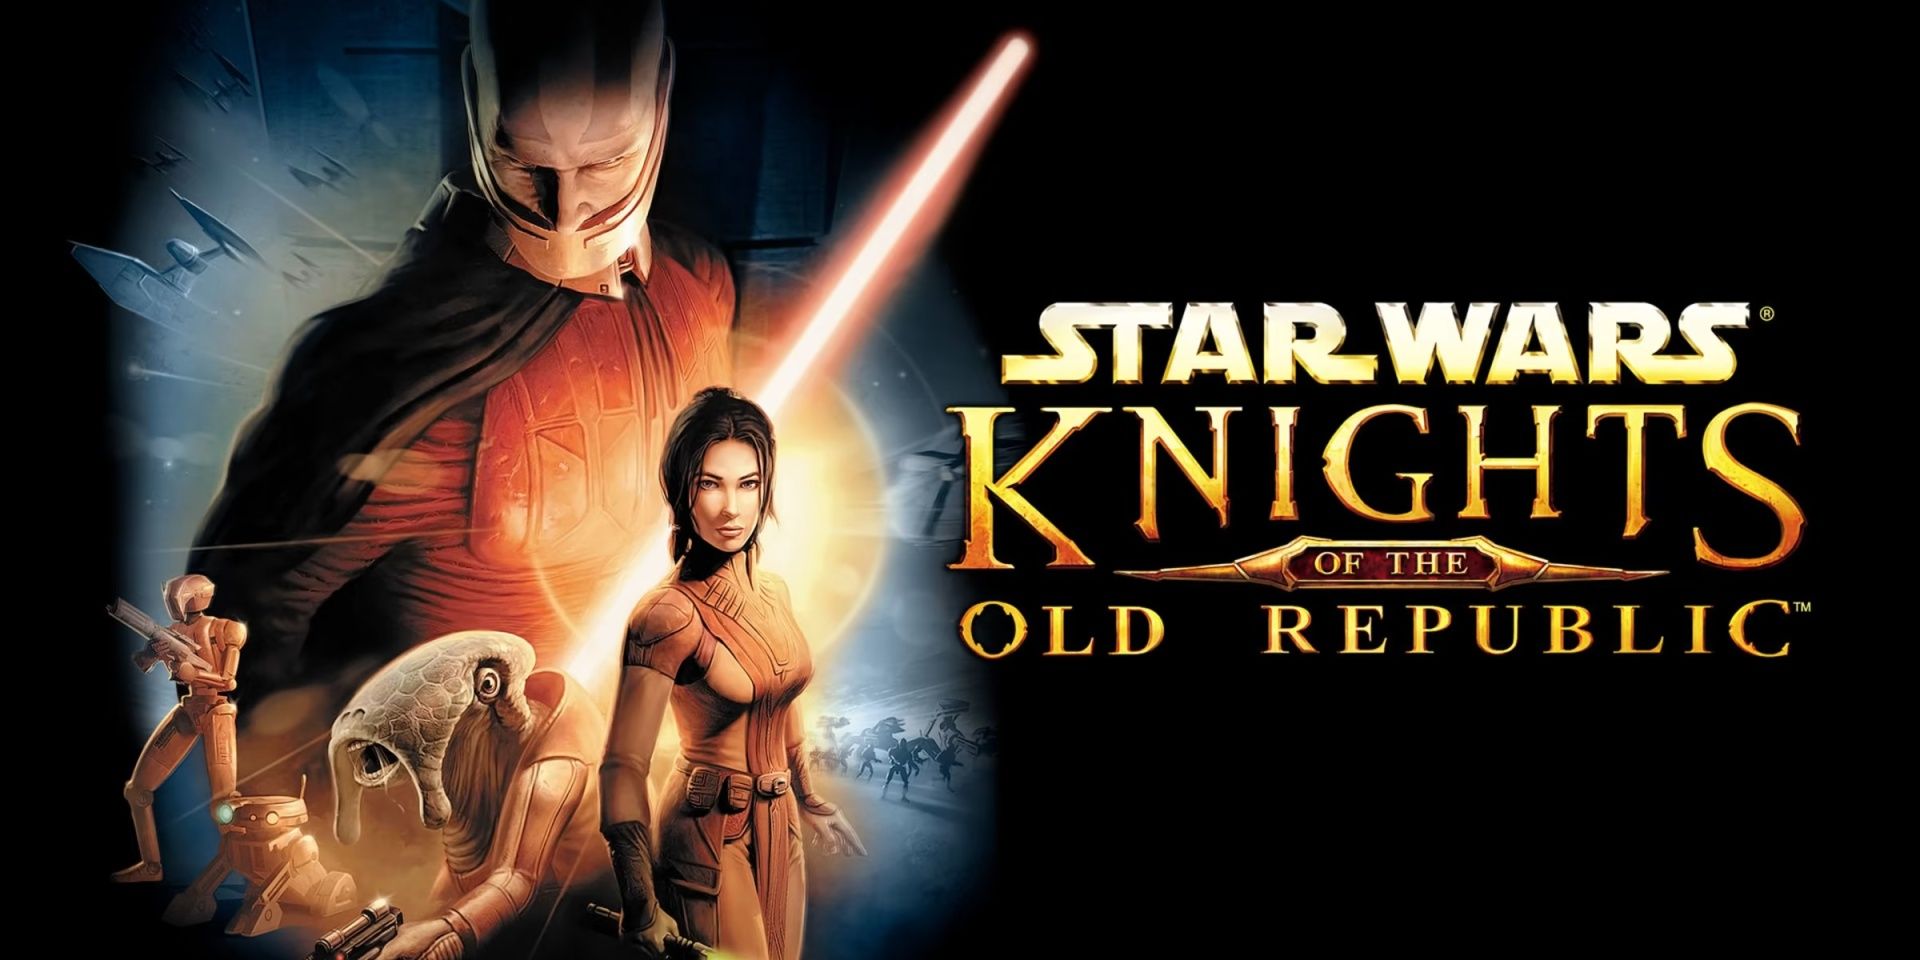 Star Wars: Knights of the Old Republic's logo next to its cover artwork, showing Darth Malak, Bastila Shan, HK-47, T3, and a Selkath character.